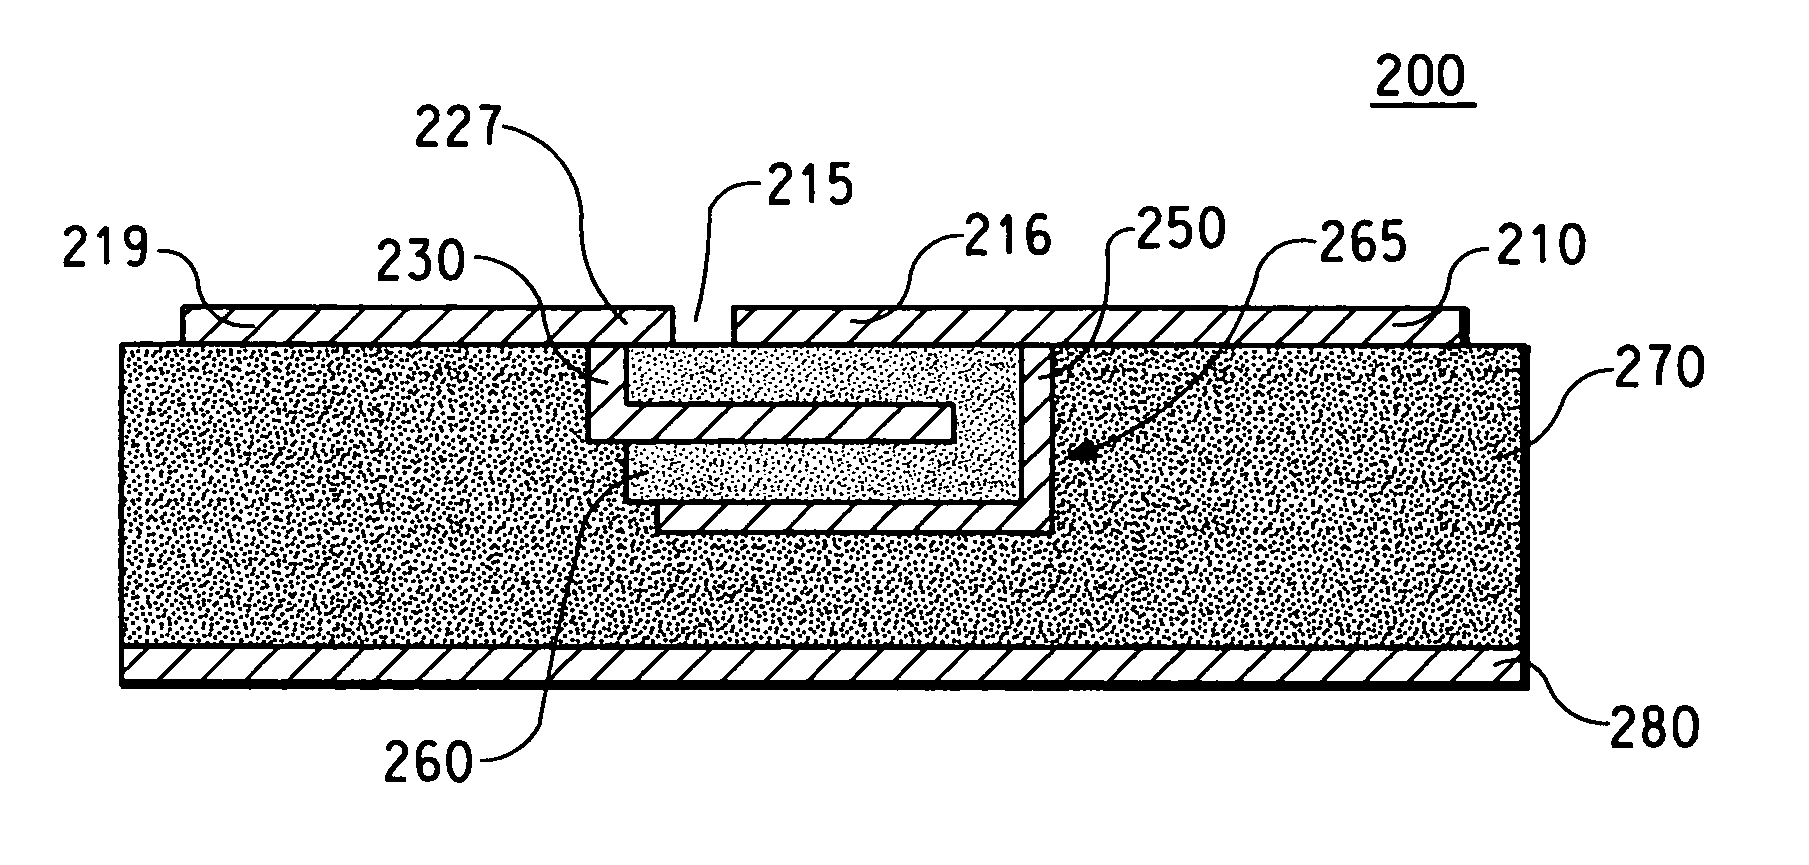 Co-fired ceramic capacitor and method for forming ceramic capacitors for use in printed wiring boards